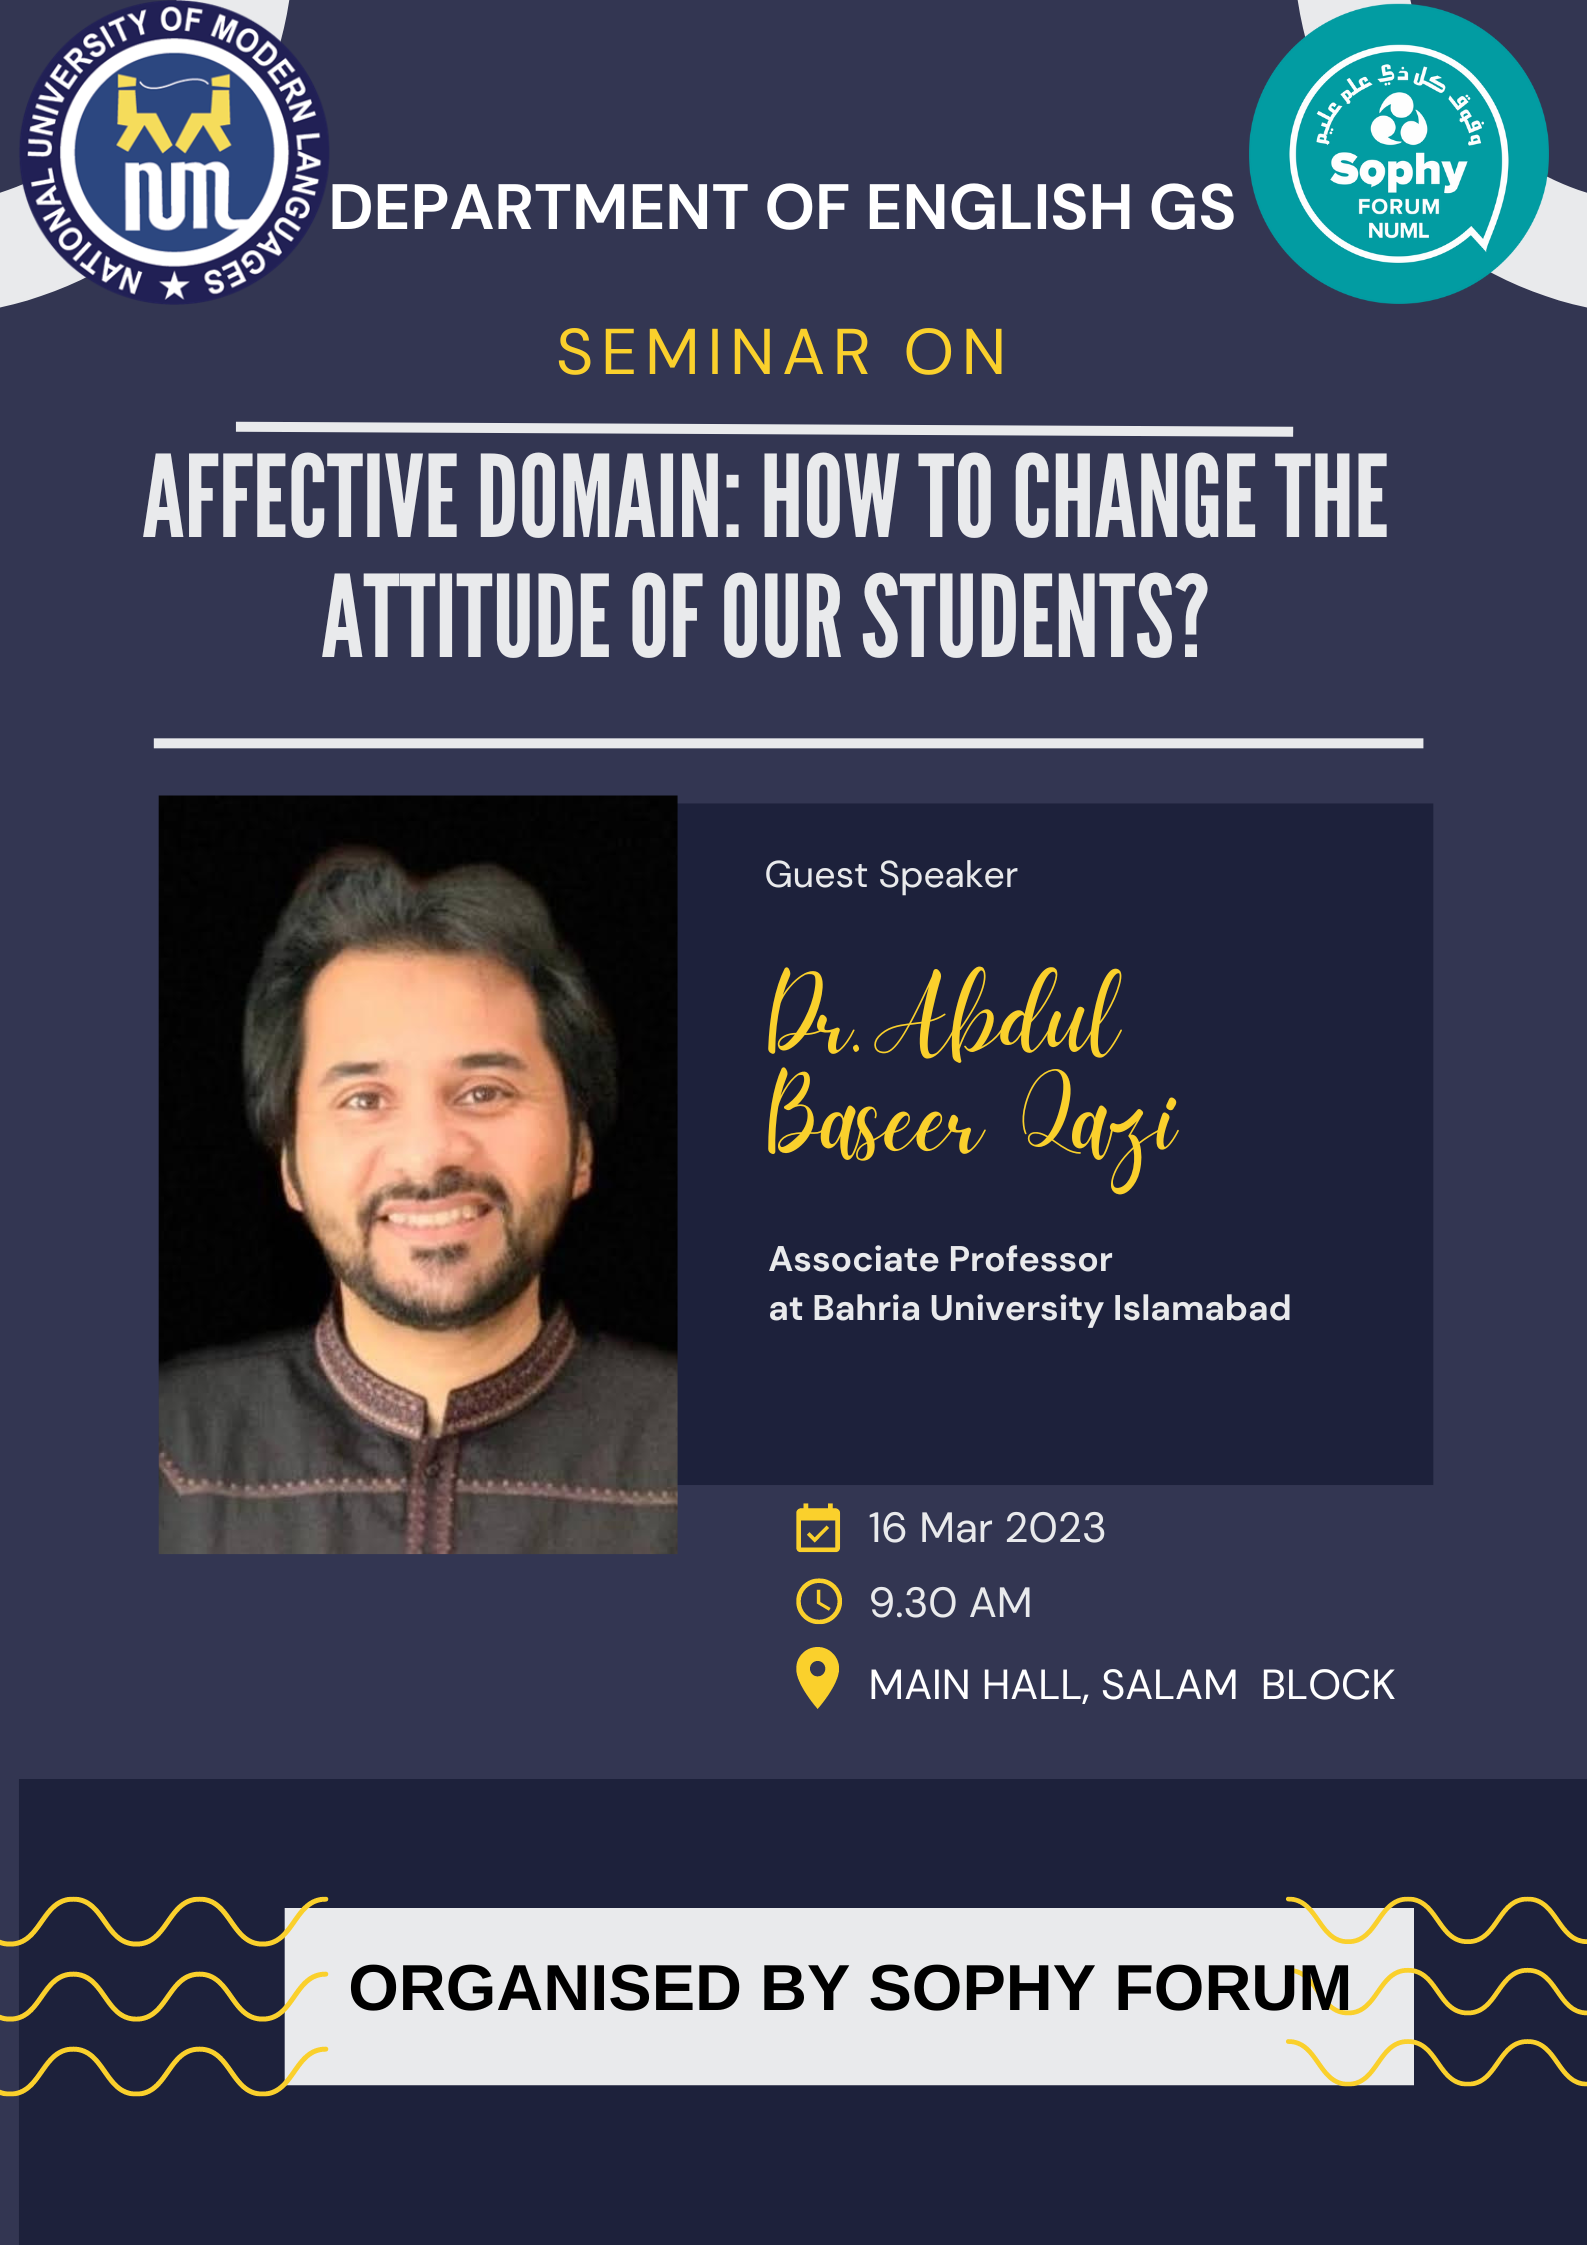 Seminar on " Affective Domain: How to Change the Attitude of Our Students?" by Sophy Forum